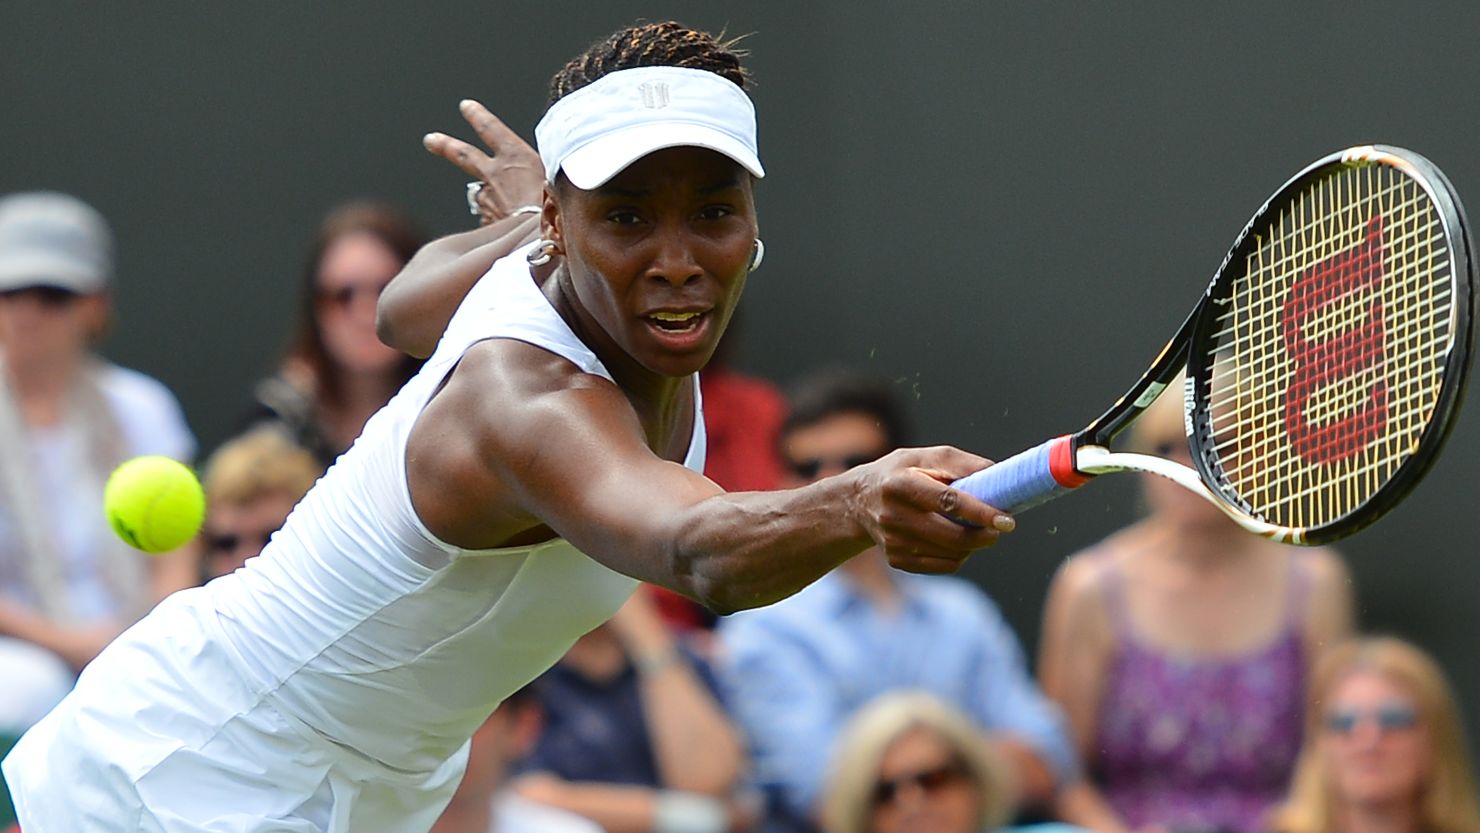 Williams lost in the opening round at Wimbledon for the first time since making her debut 15 years ago.